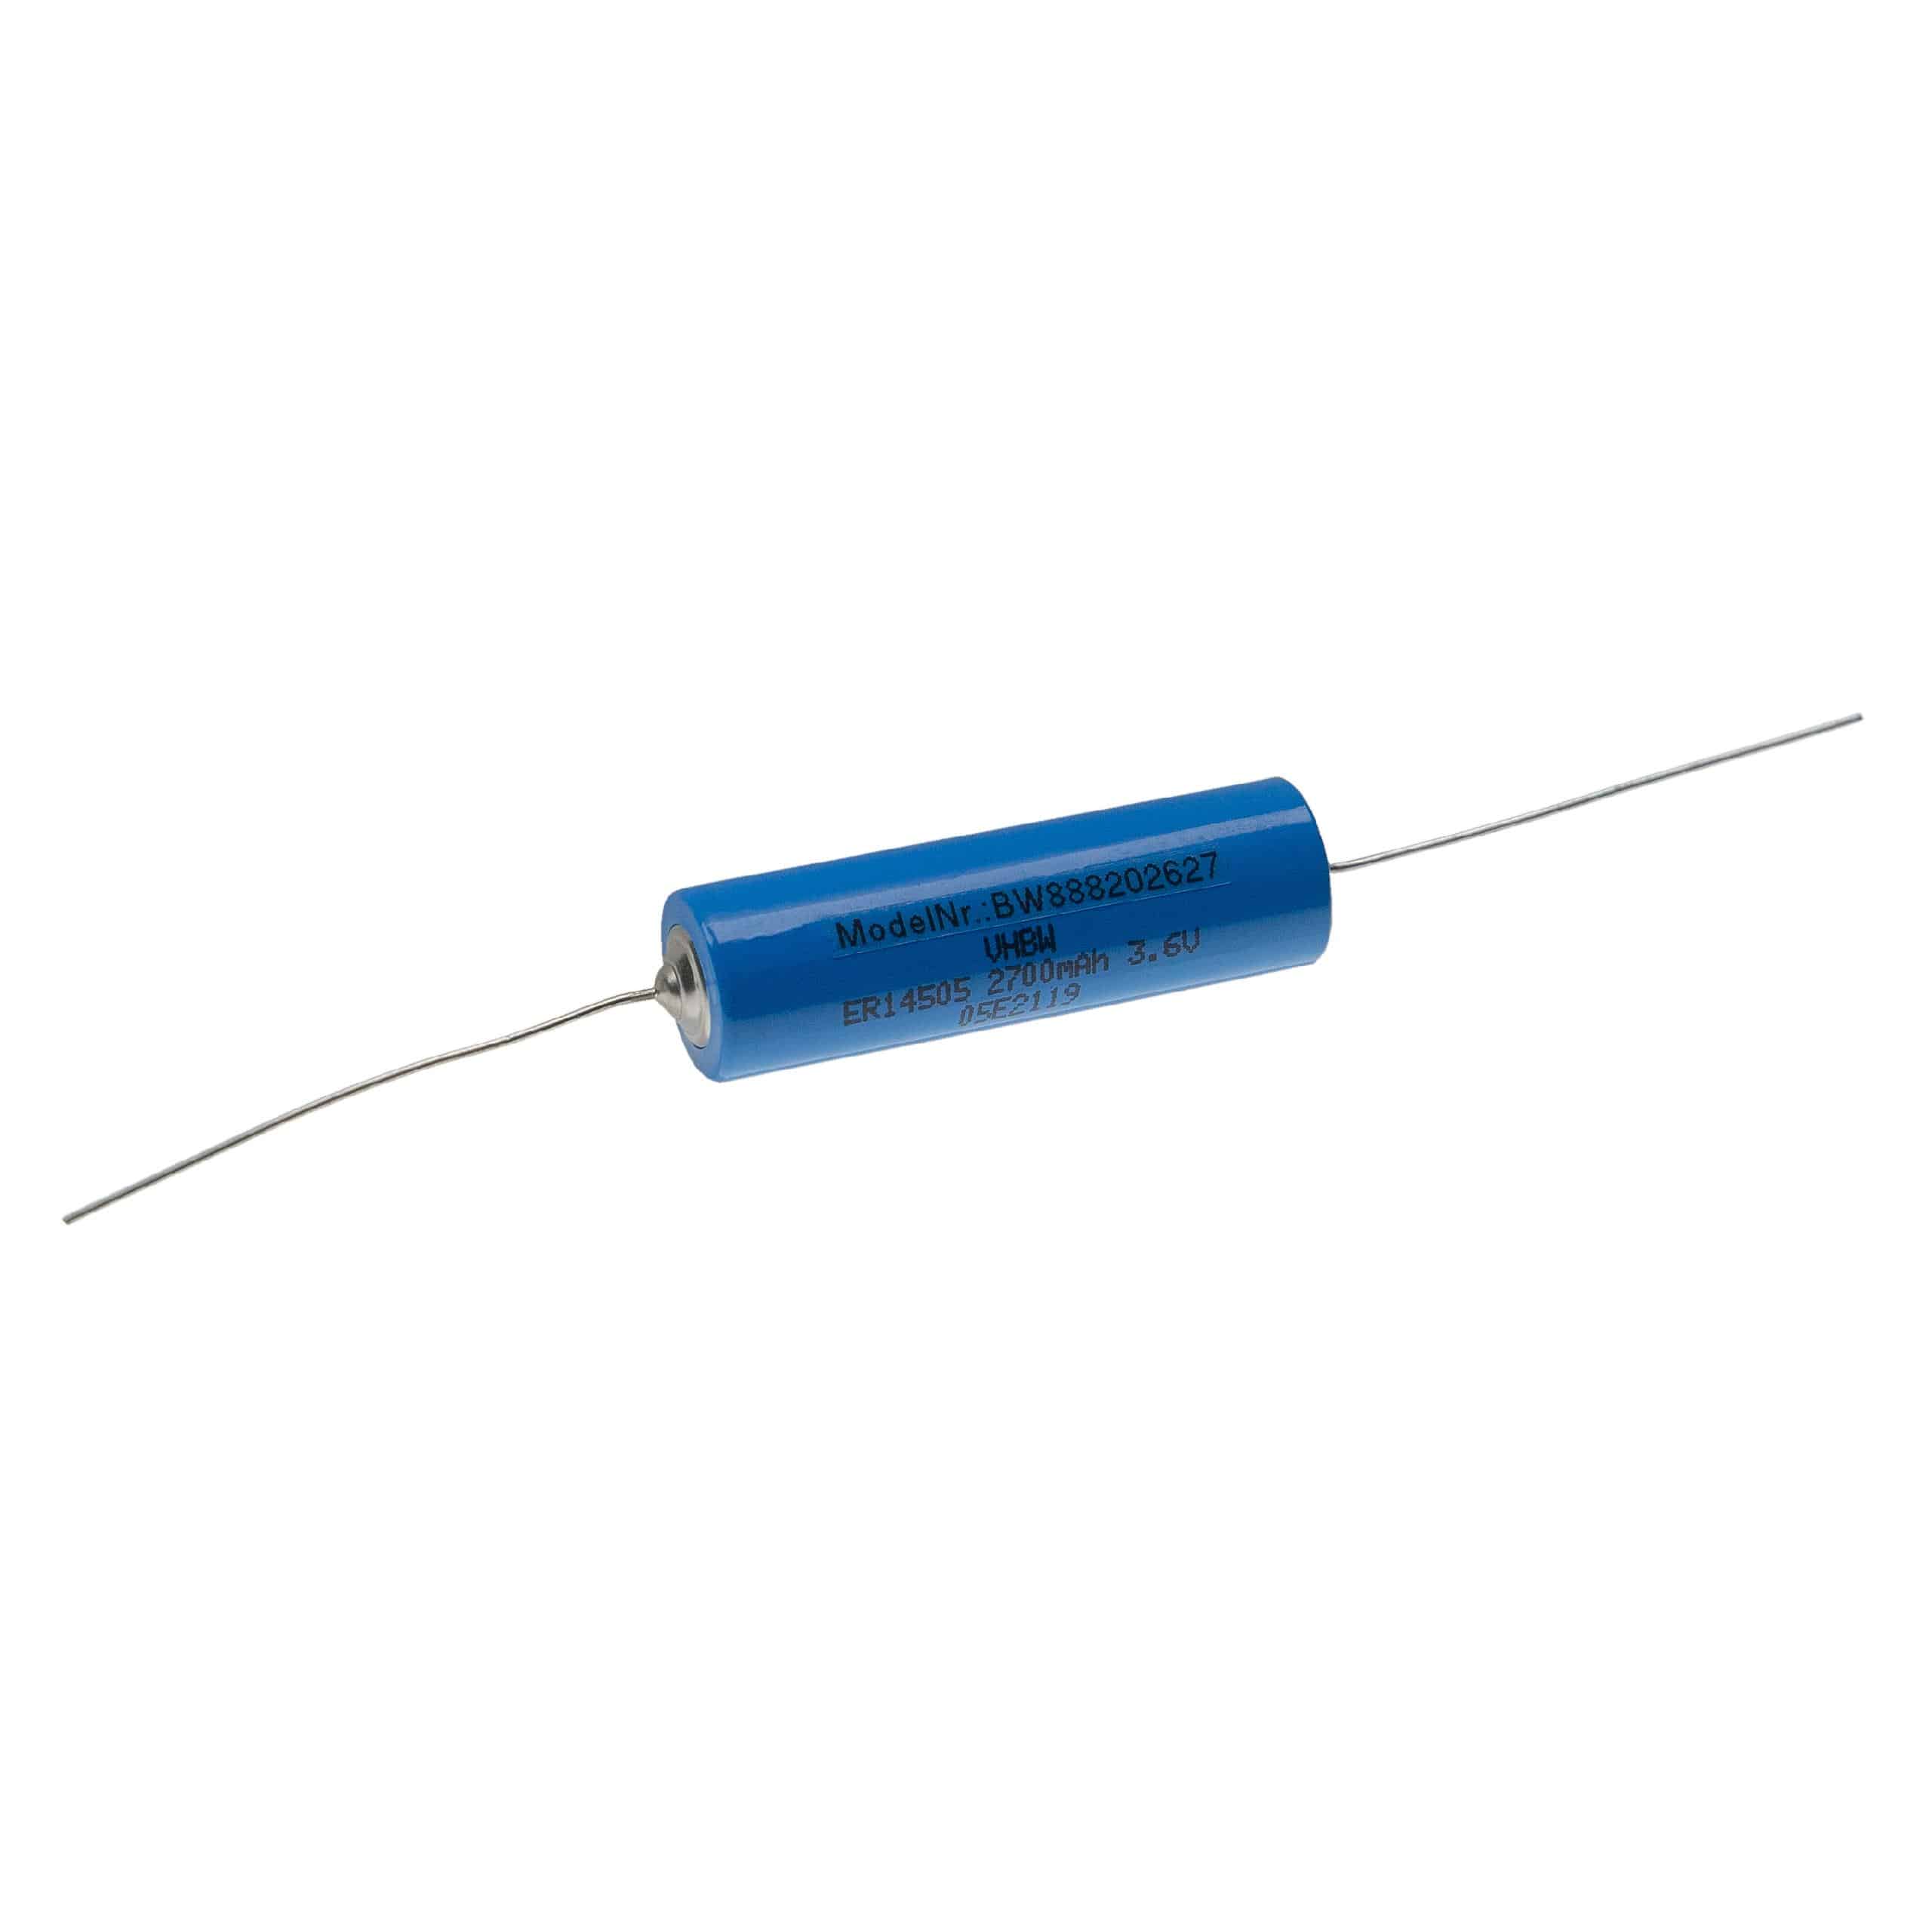 ER14505 Premium Replacement Battery - 2700mAh 3.6V Li-SOCl2, with Soldering Connections